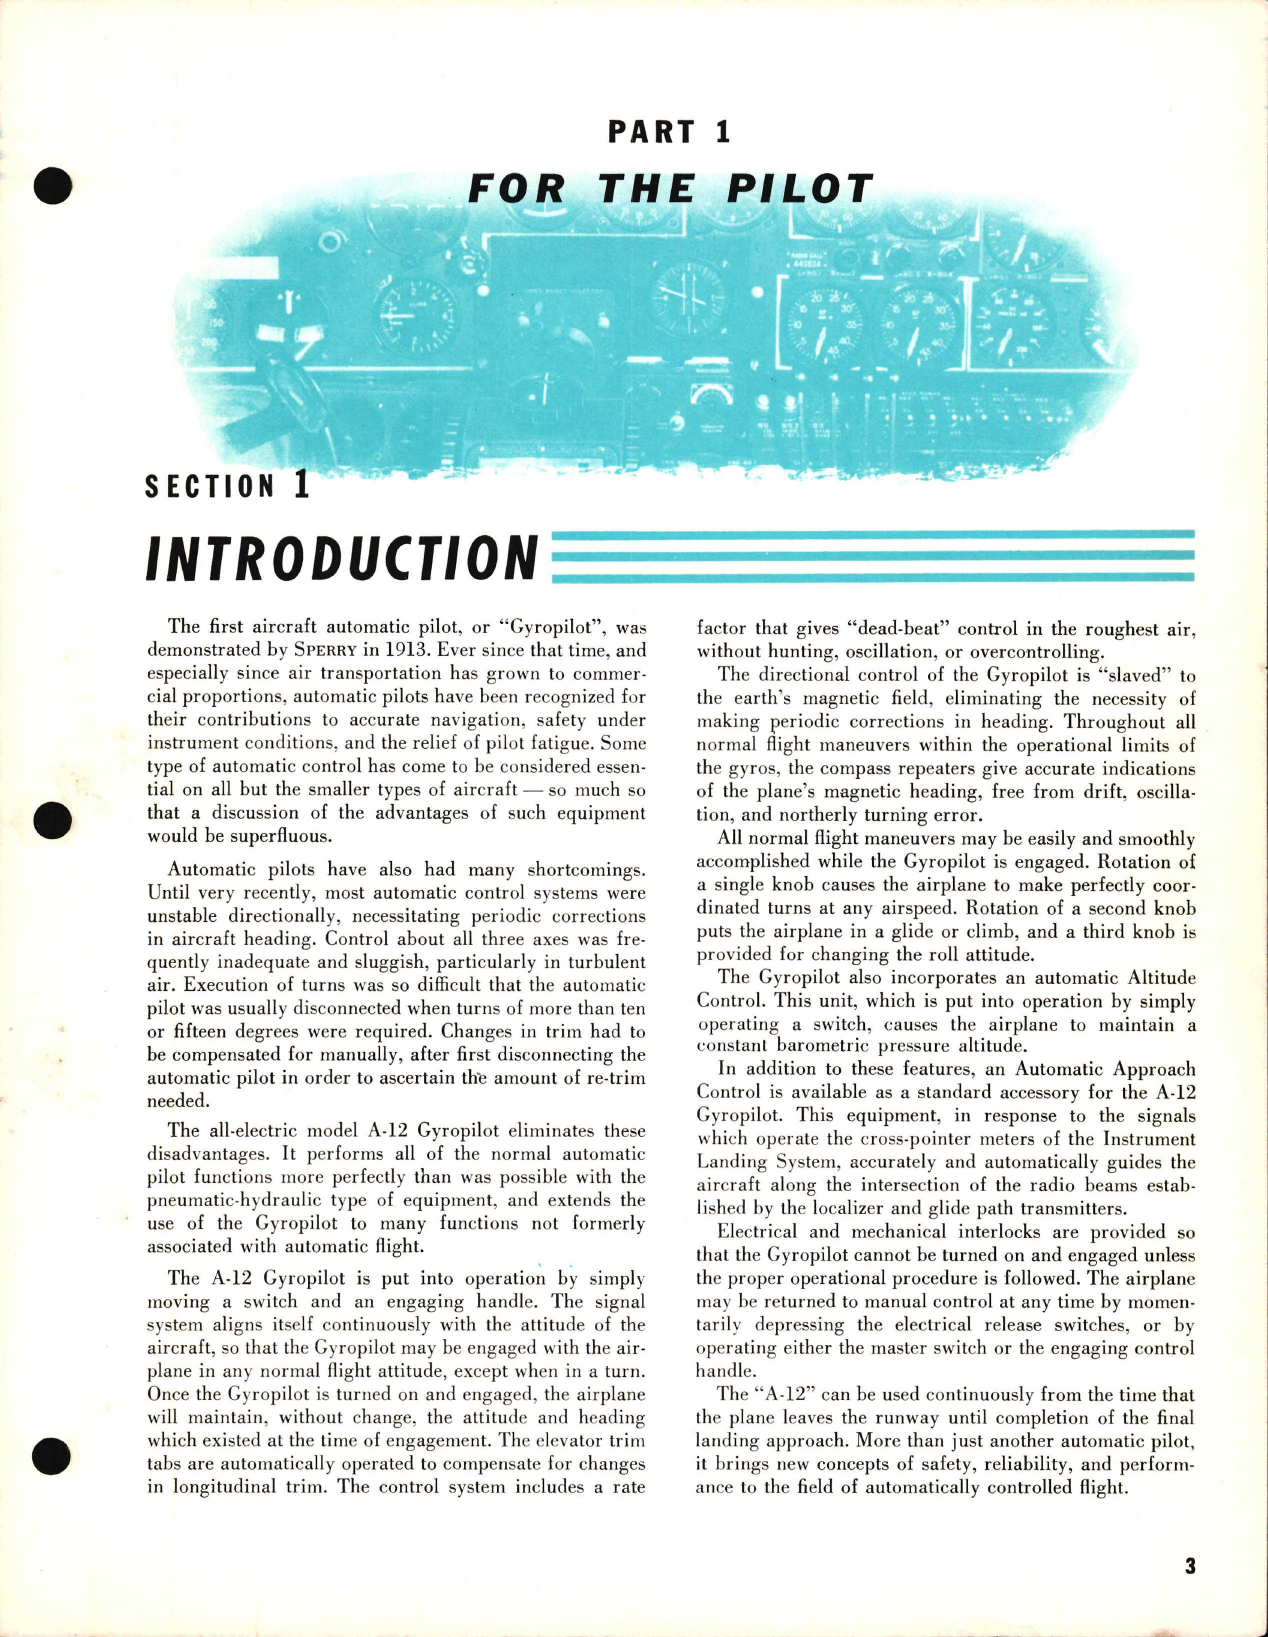 Sample page 5 from AirCorps Library document: Operation and Service for Model A-12 Gyropilot Flight Control